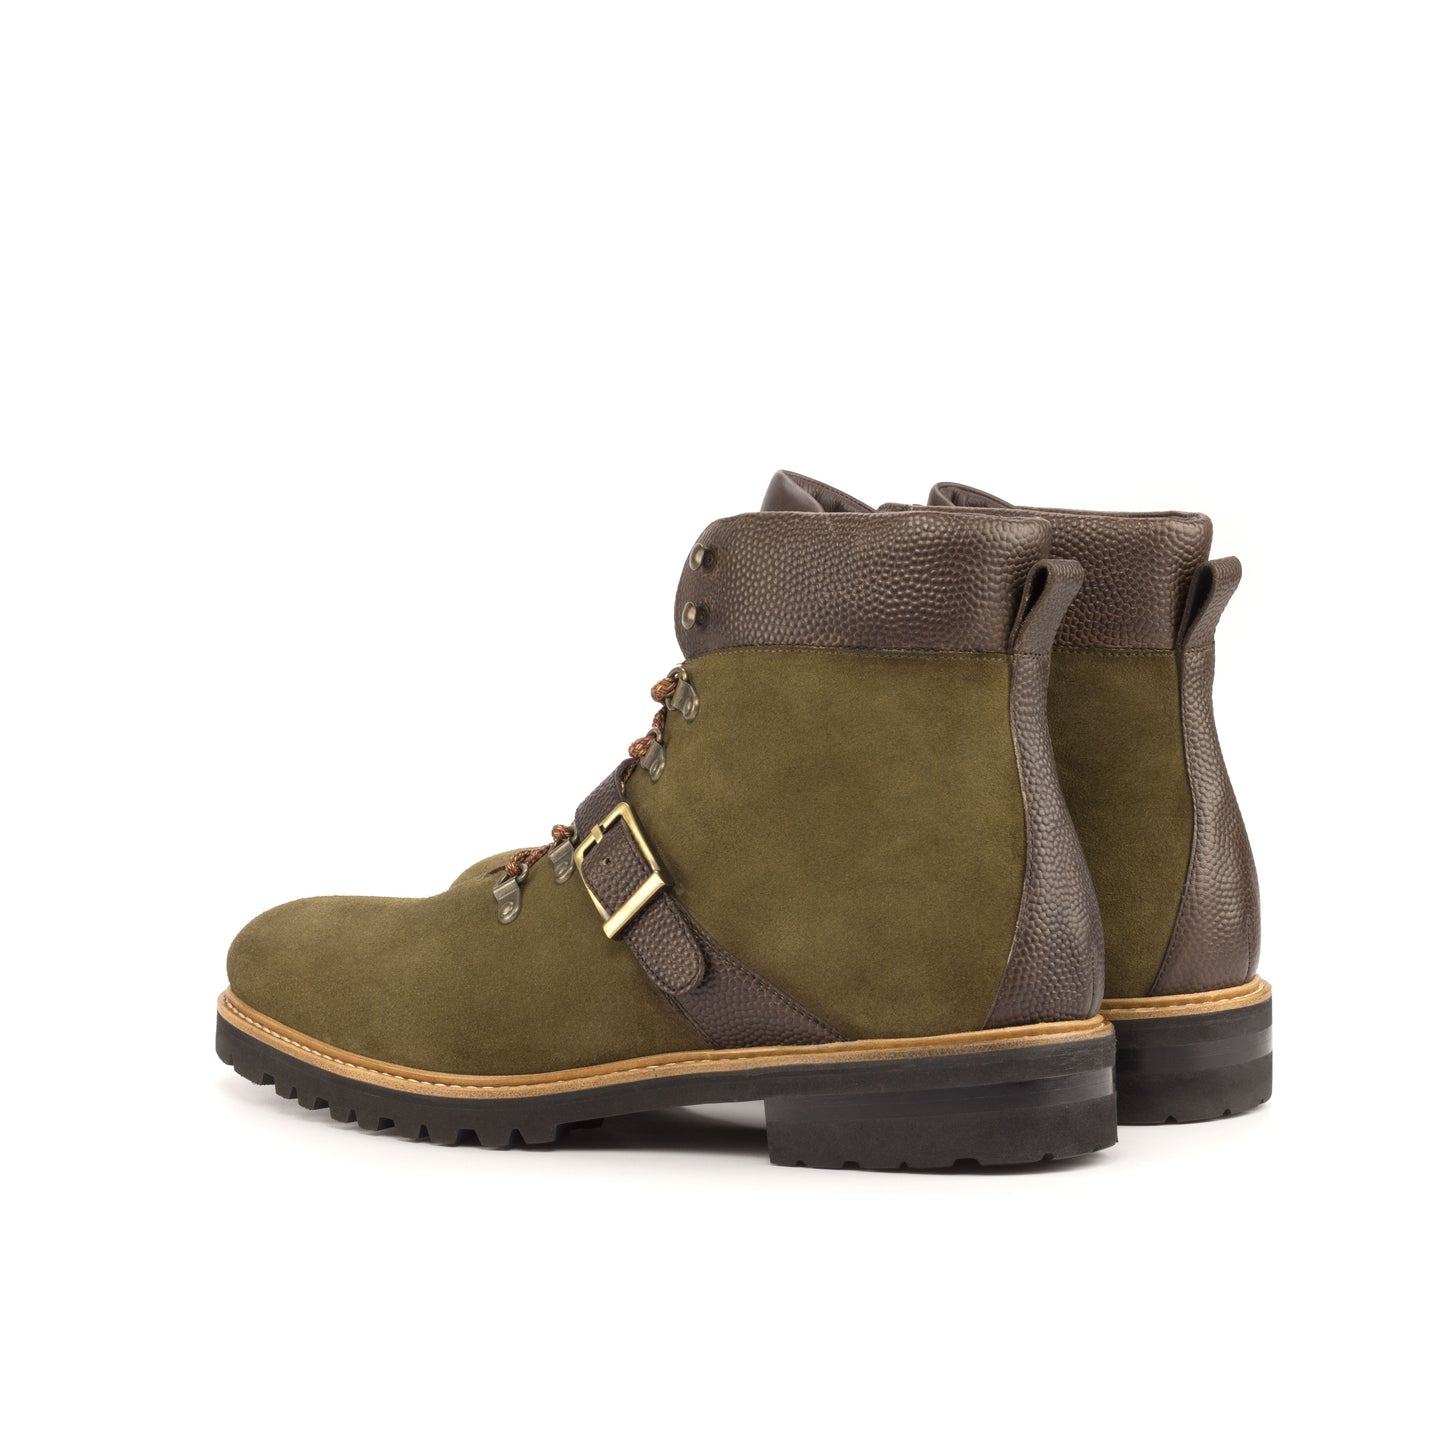 SUITCAFE Hiking Men's Boots Khaki Suede Leather